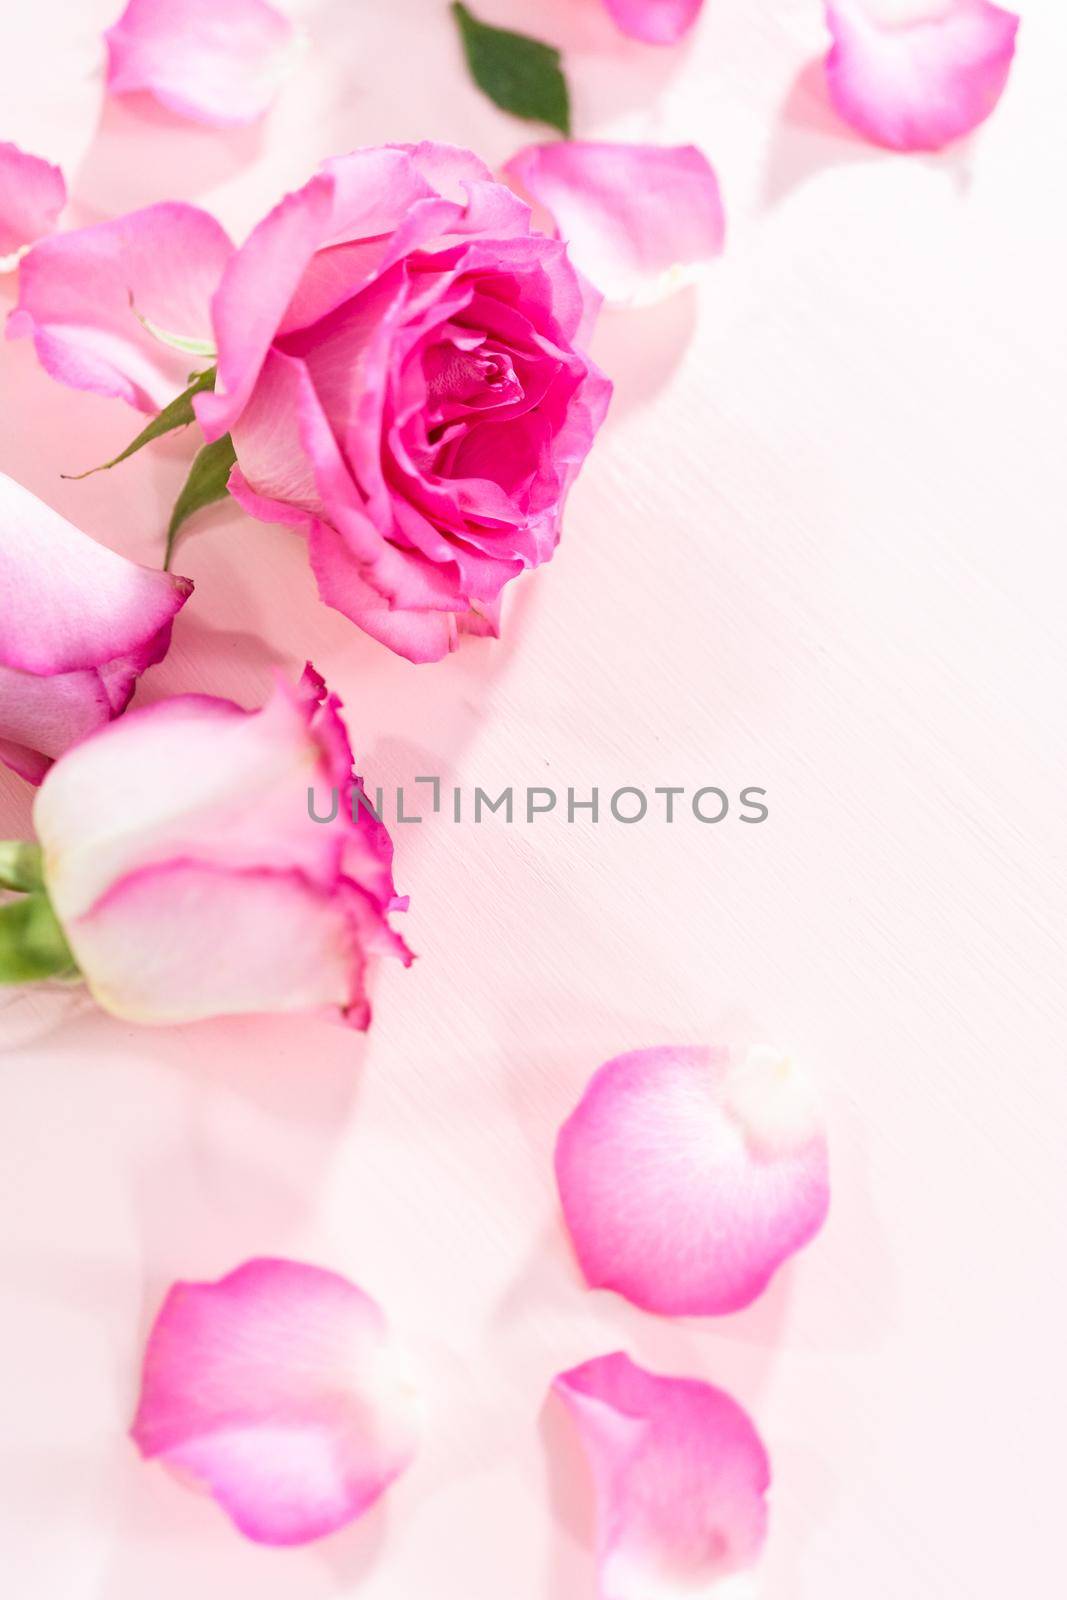 Pink roses and rose petals on a pink background.